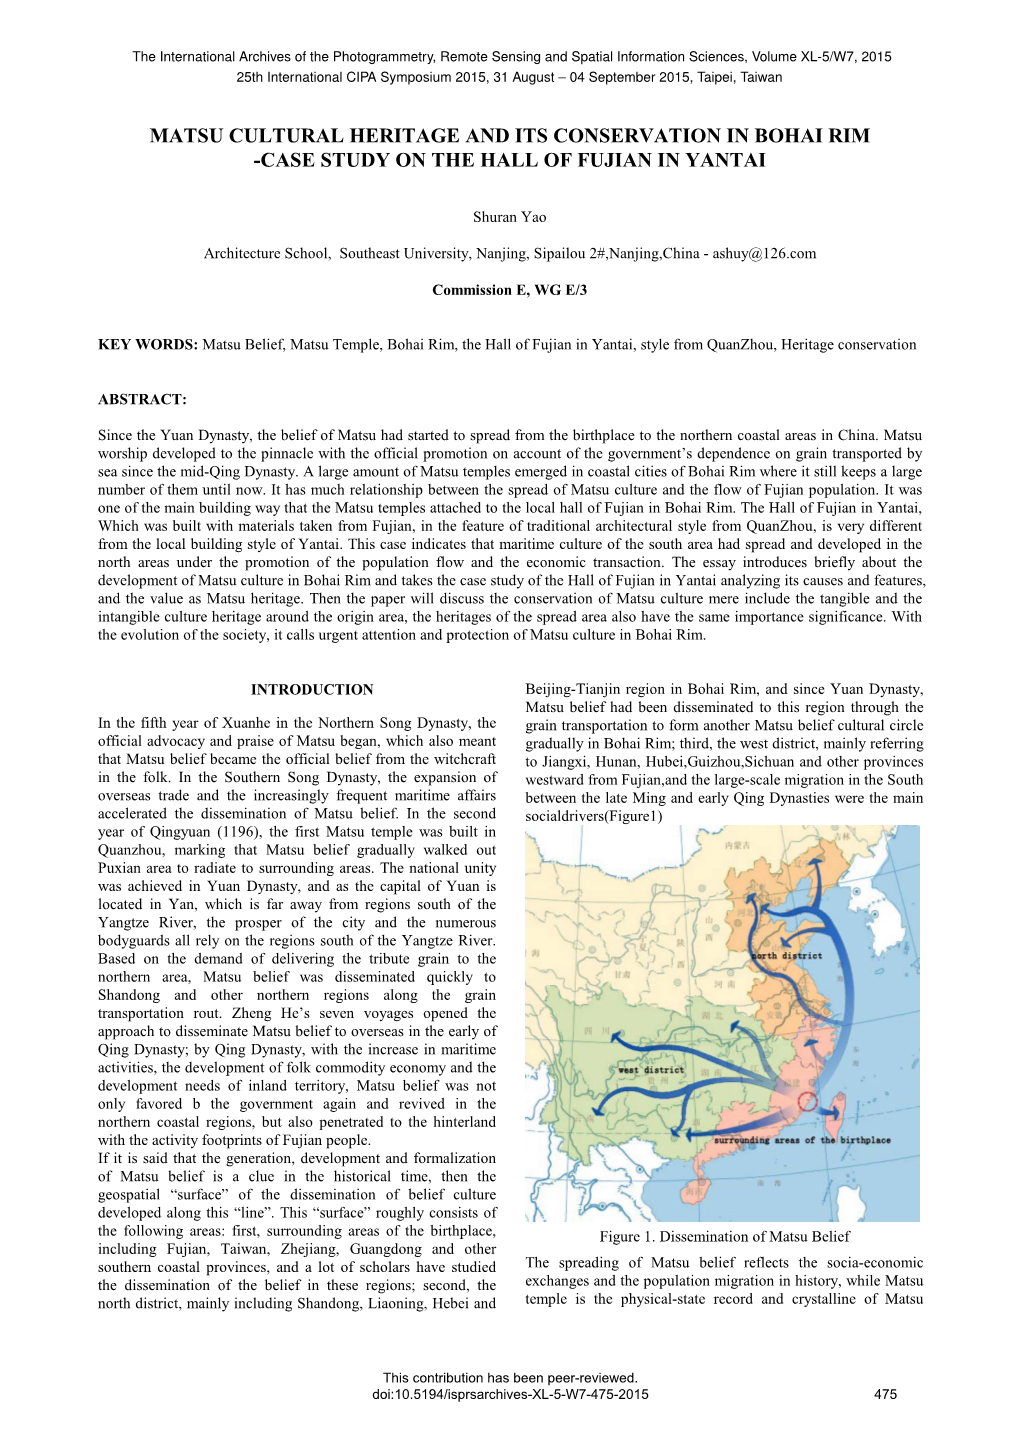 Matsu Cultural Heritage and Its Conservation in Bohai Rim -Case Study on the Hall of Fujian in Yantai